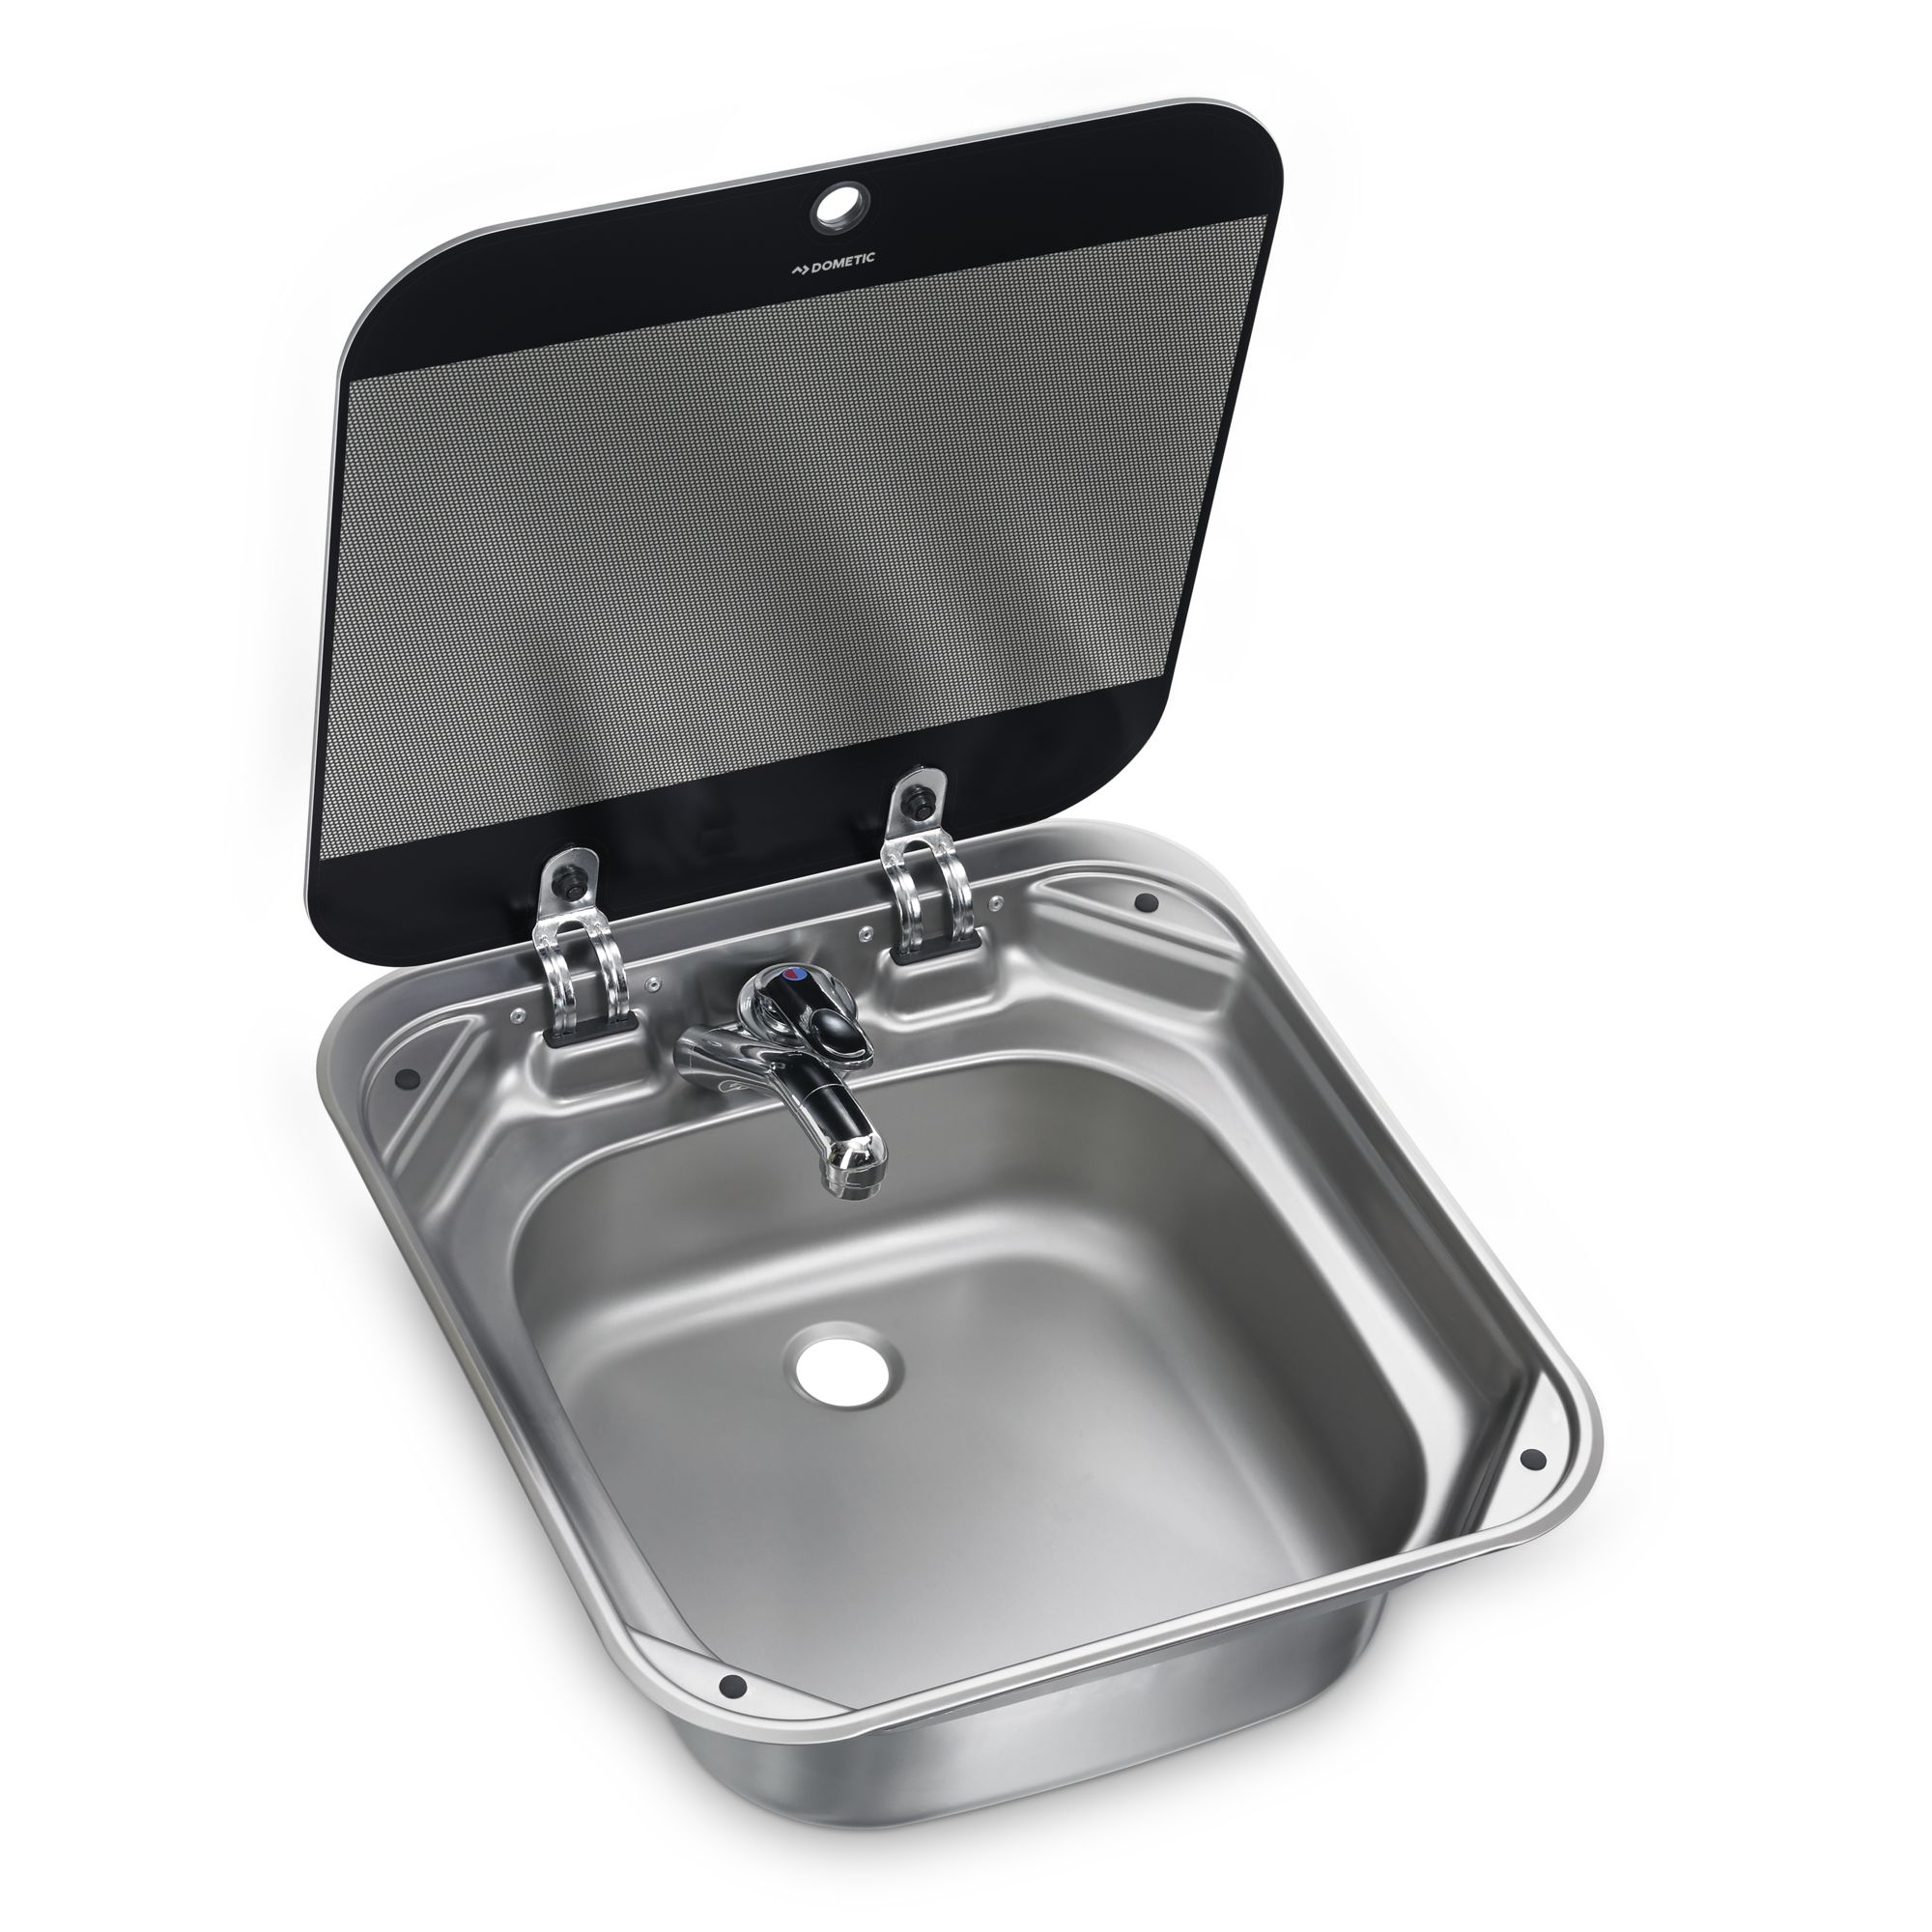 Dometic SNG 4244 stainless steel sink, 420 x 440 mm, with safety glass lid